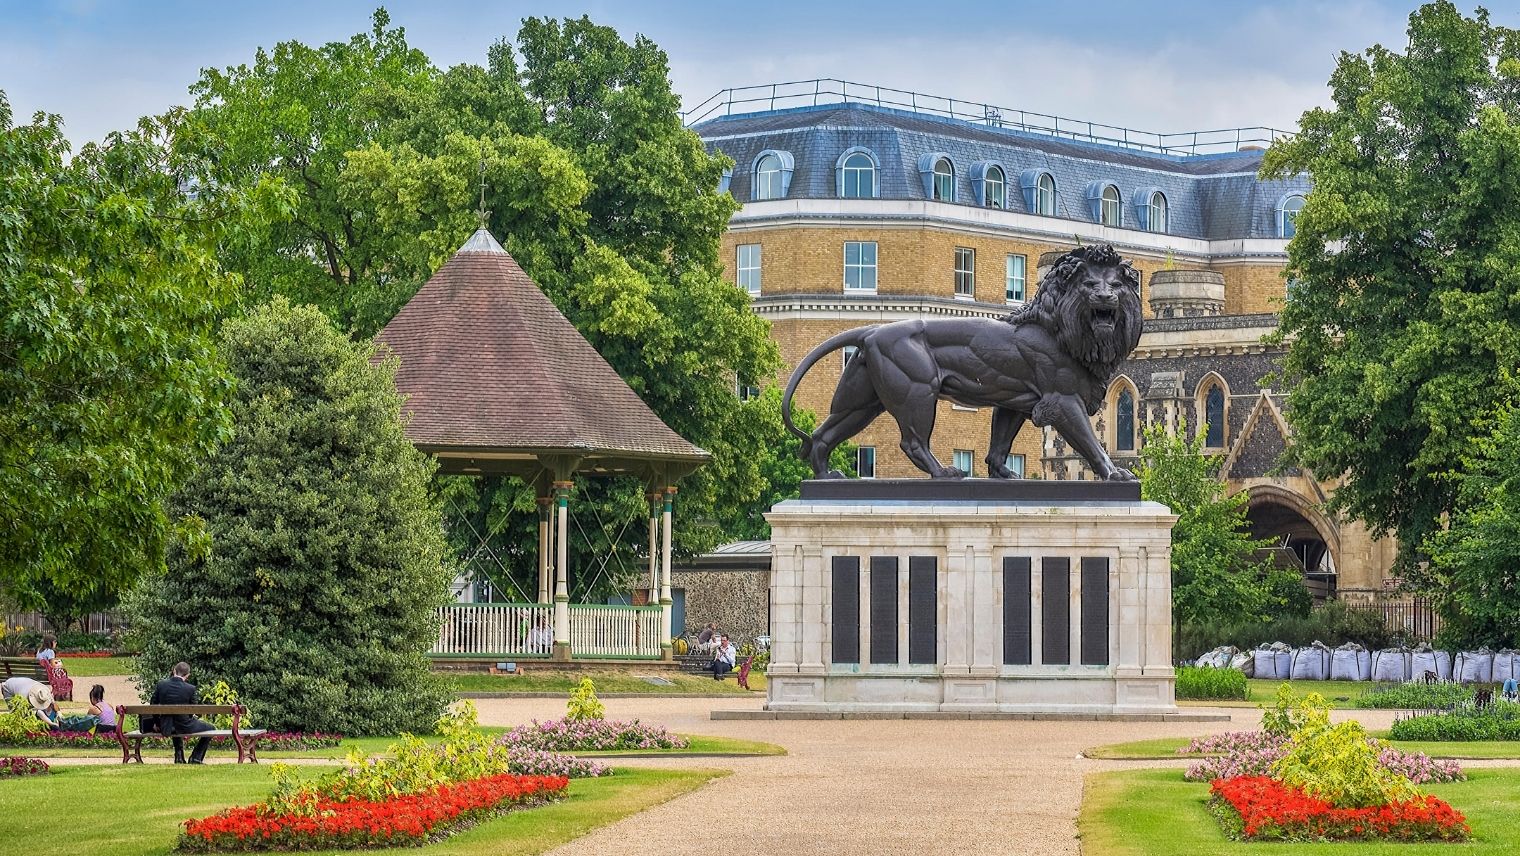 The Maiwand Lion, Forbury Park